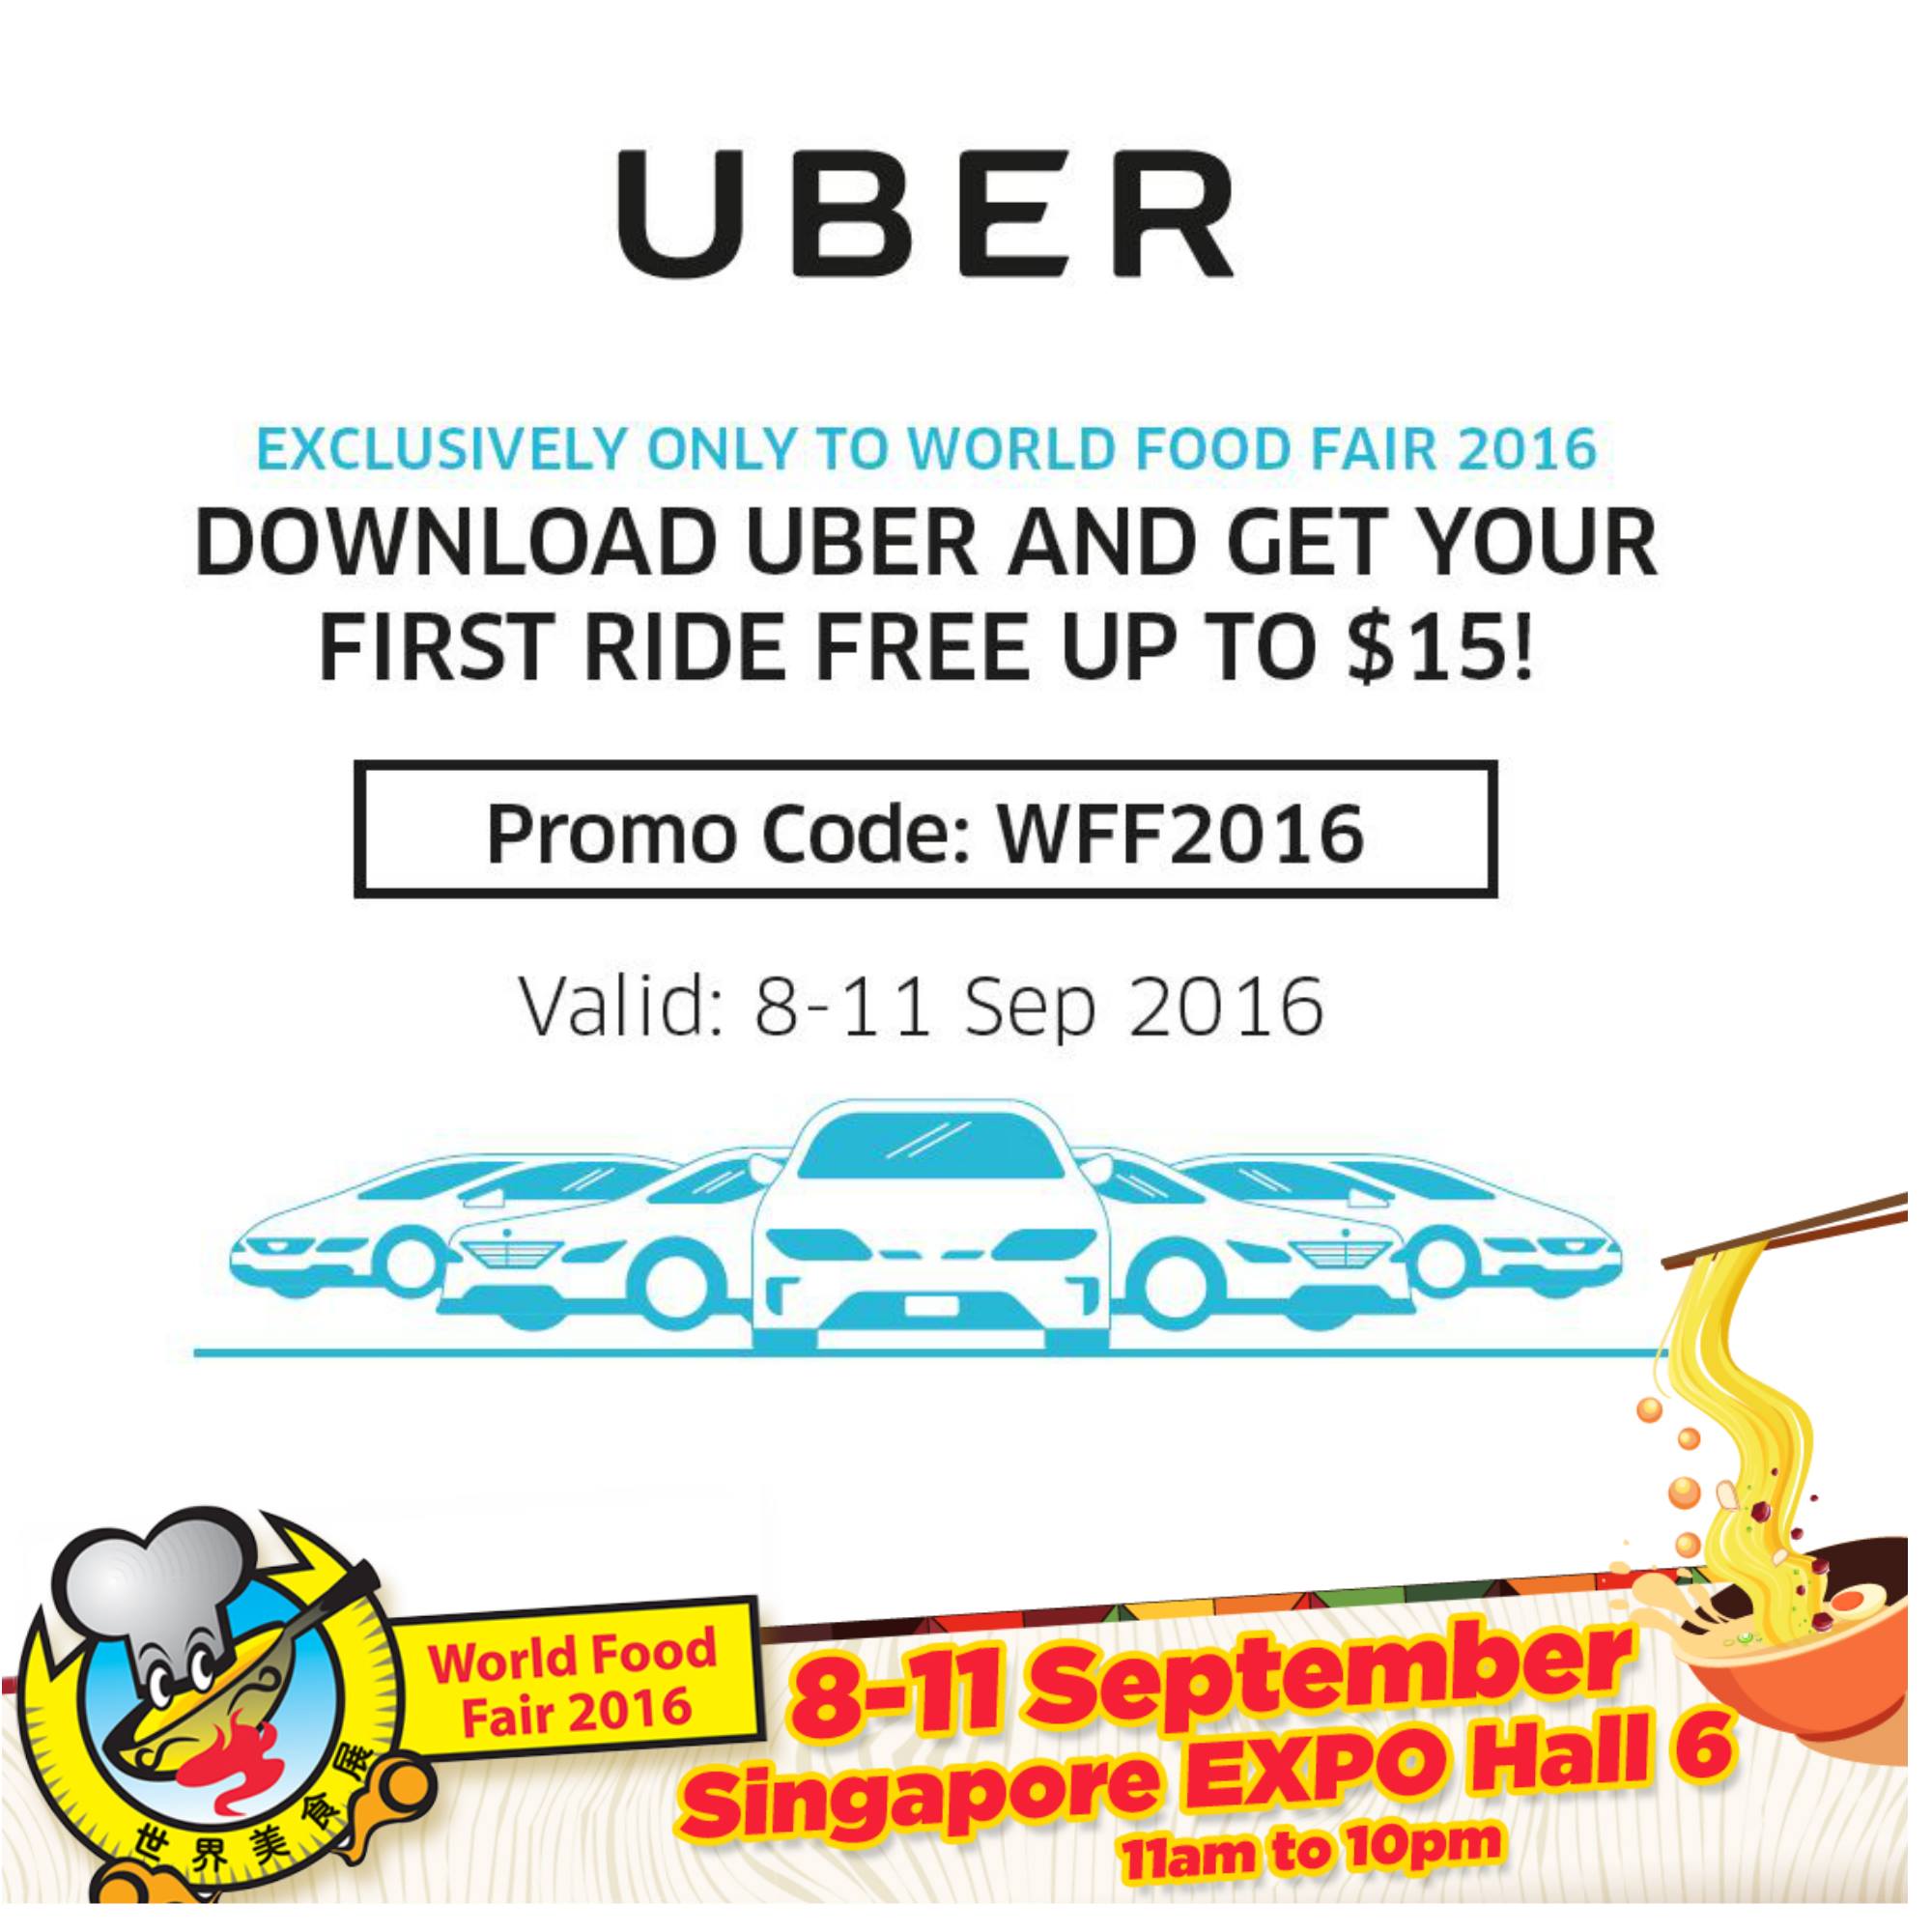 UBER Singapore Exclusive World Food Fair 2016 Promotion 8 to 11 Sep 2016